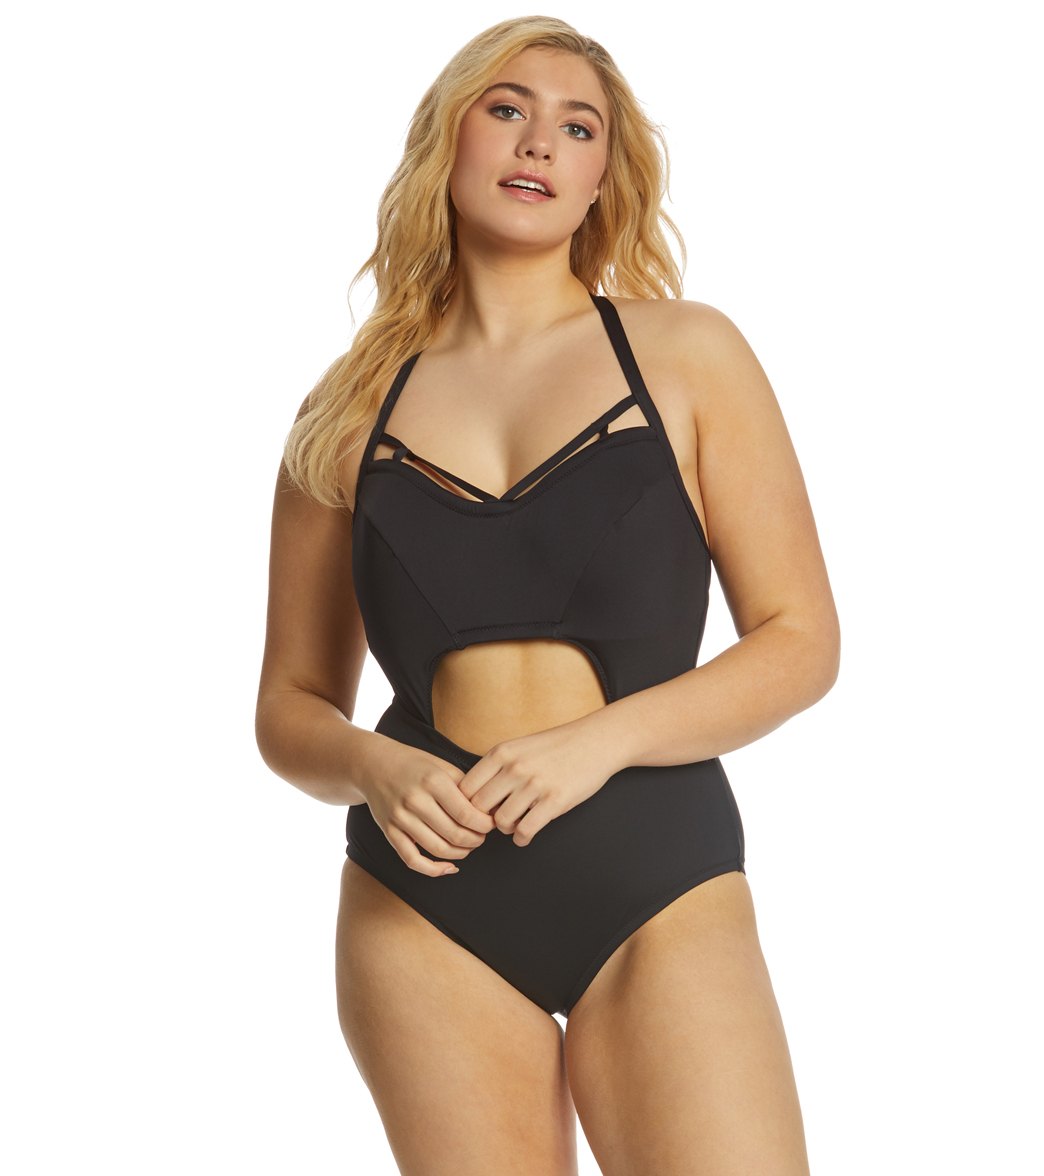 Jessica Simpson Plus Size Solid One Piece Swimsuit At Swimoutlet Com